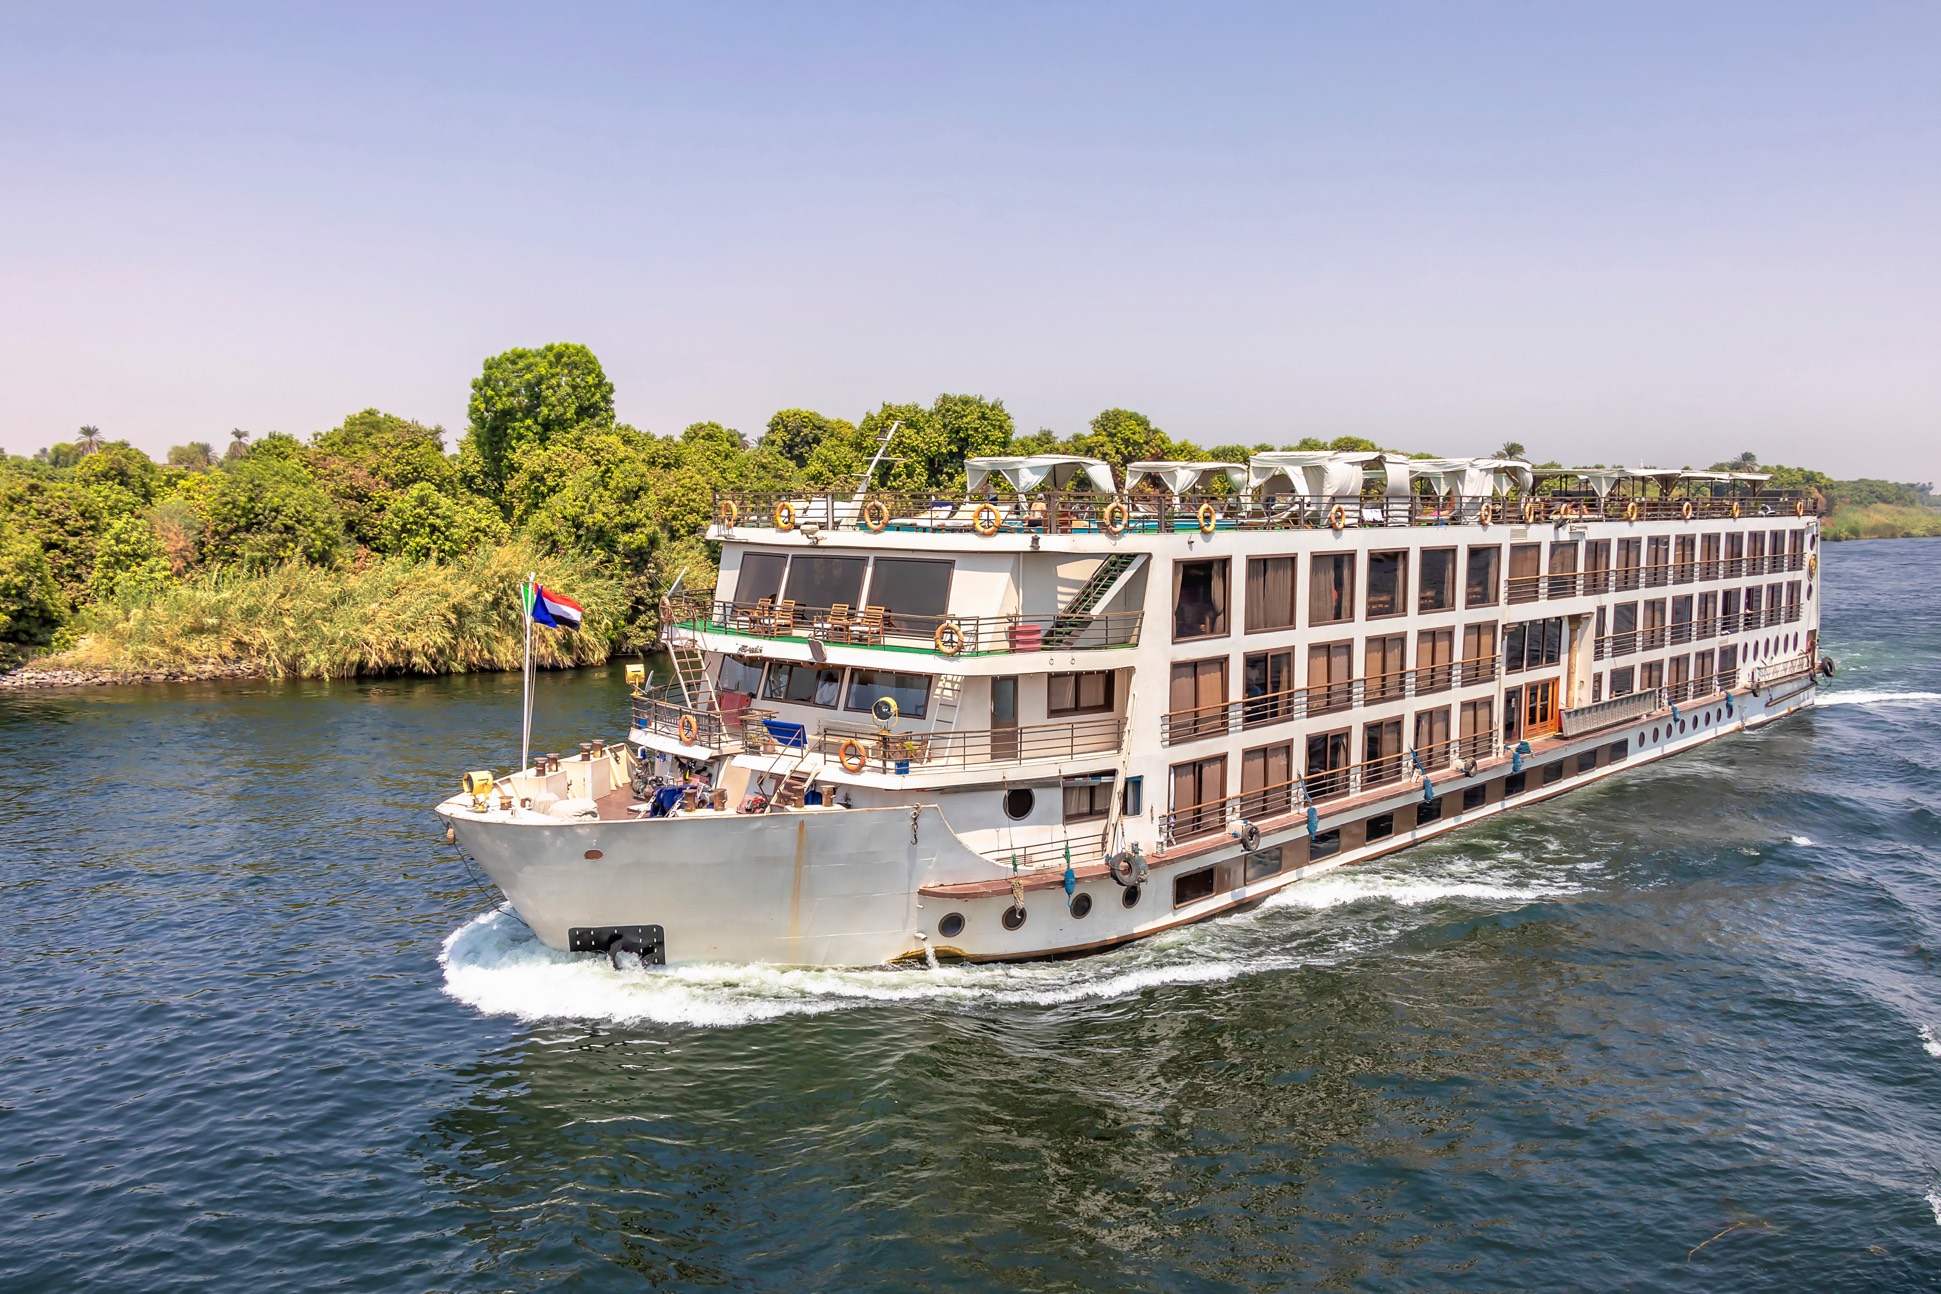 Egypt Escapes - Nile Cruise - Vessels & Boats